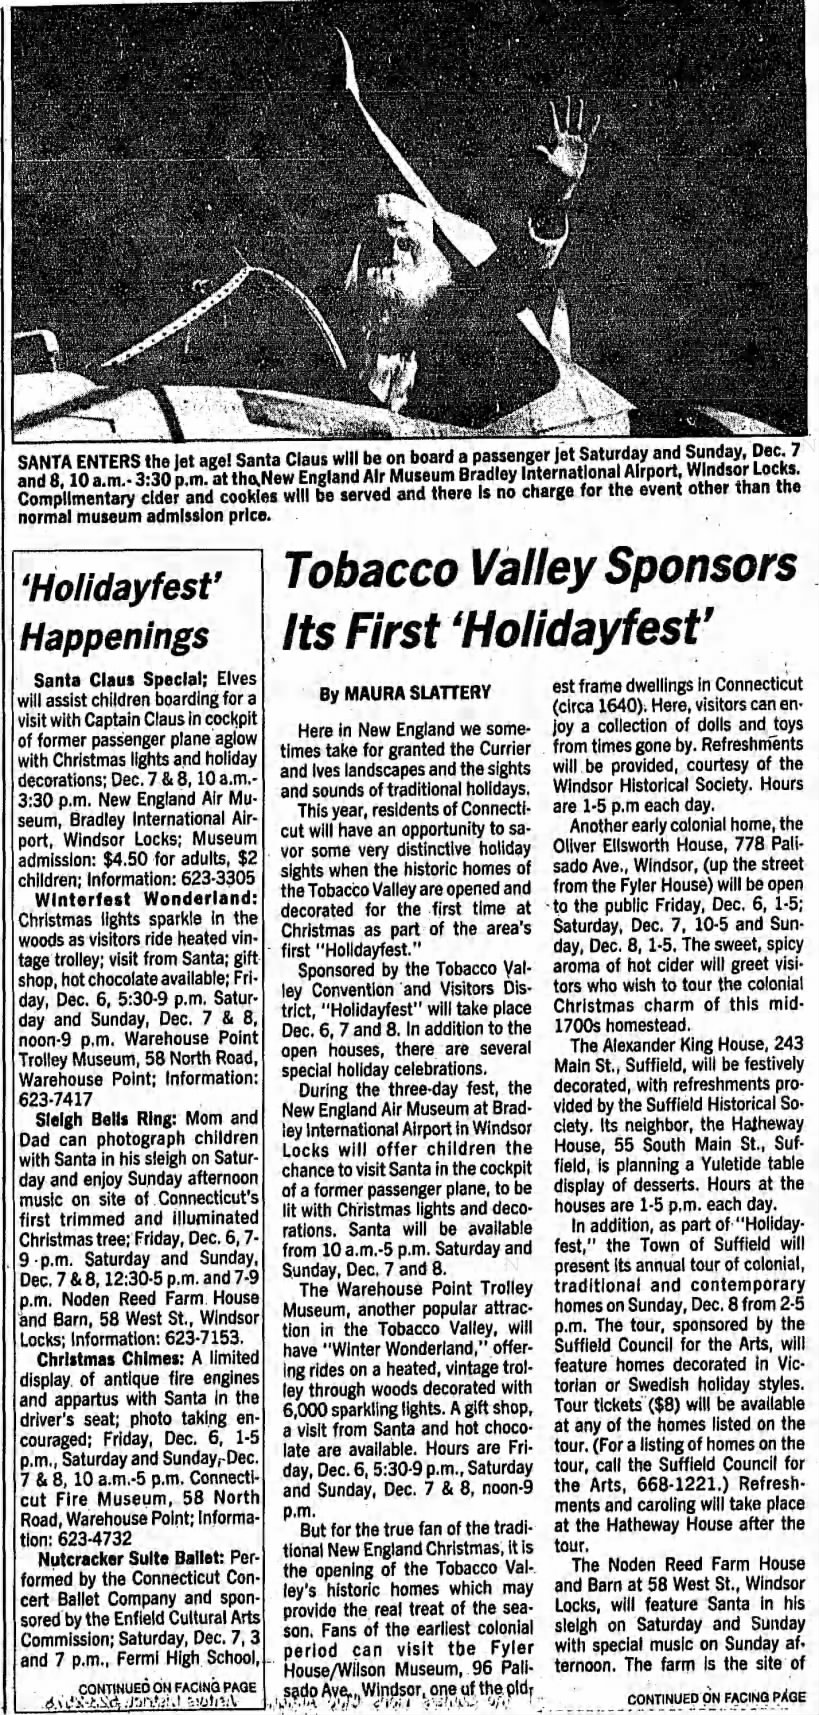 Tobacco Valley Sponsors Its First 'Holidayfest'